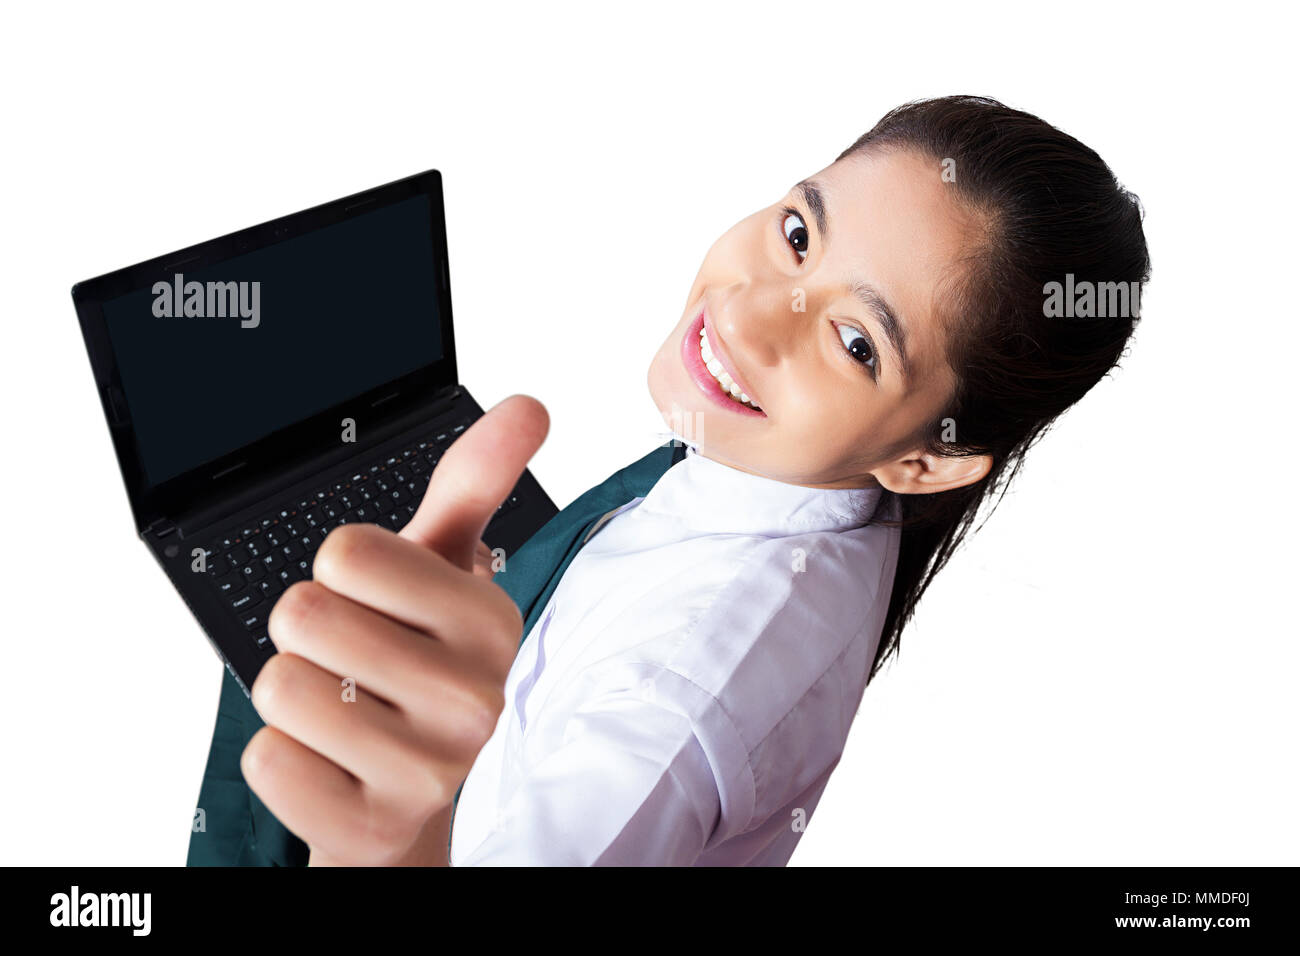 One School Girl Student Showing Thumbs-up With Laptop Study Education Stock Photo